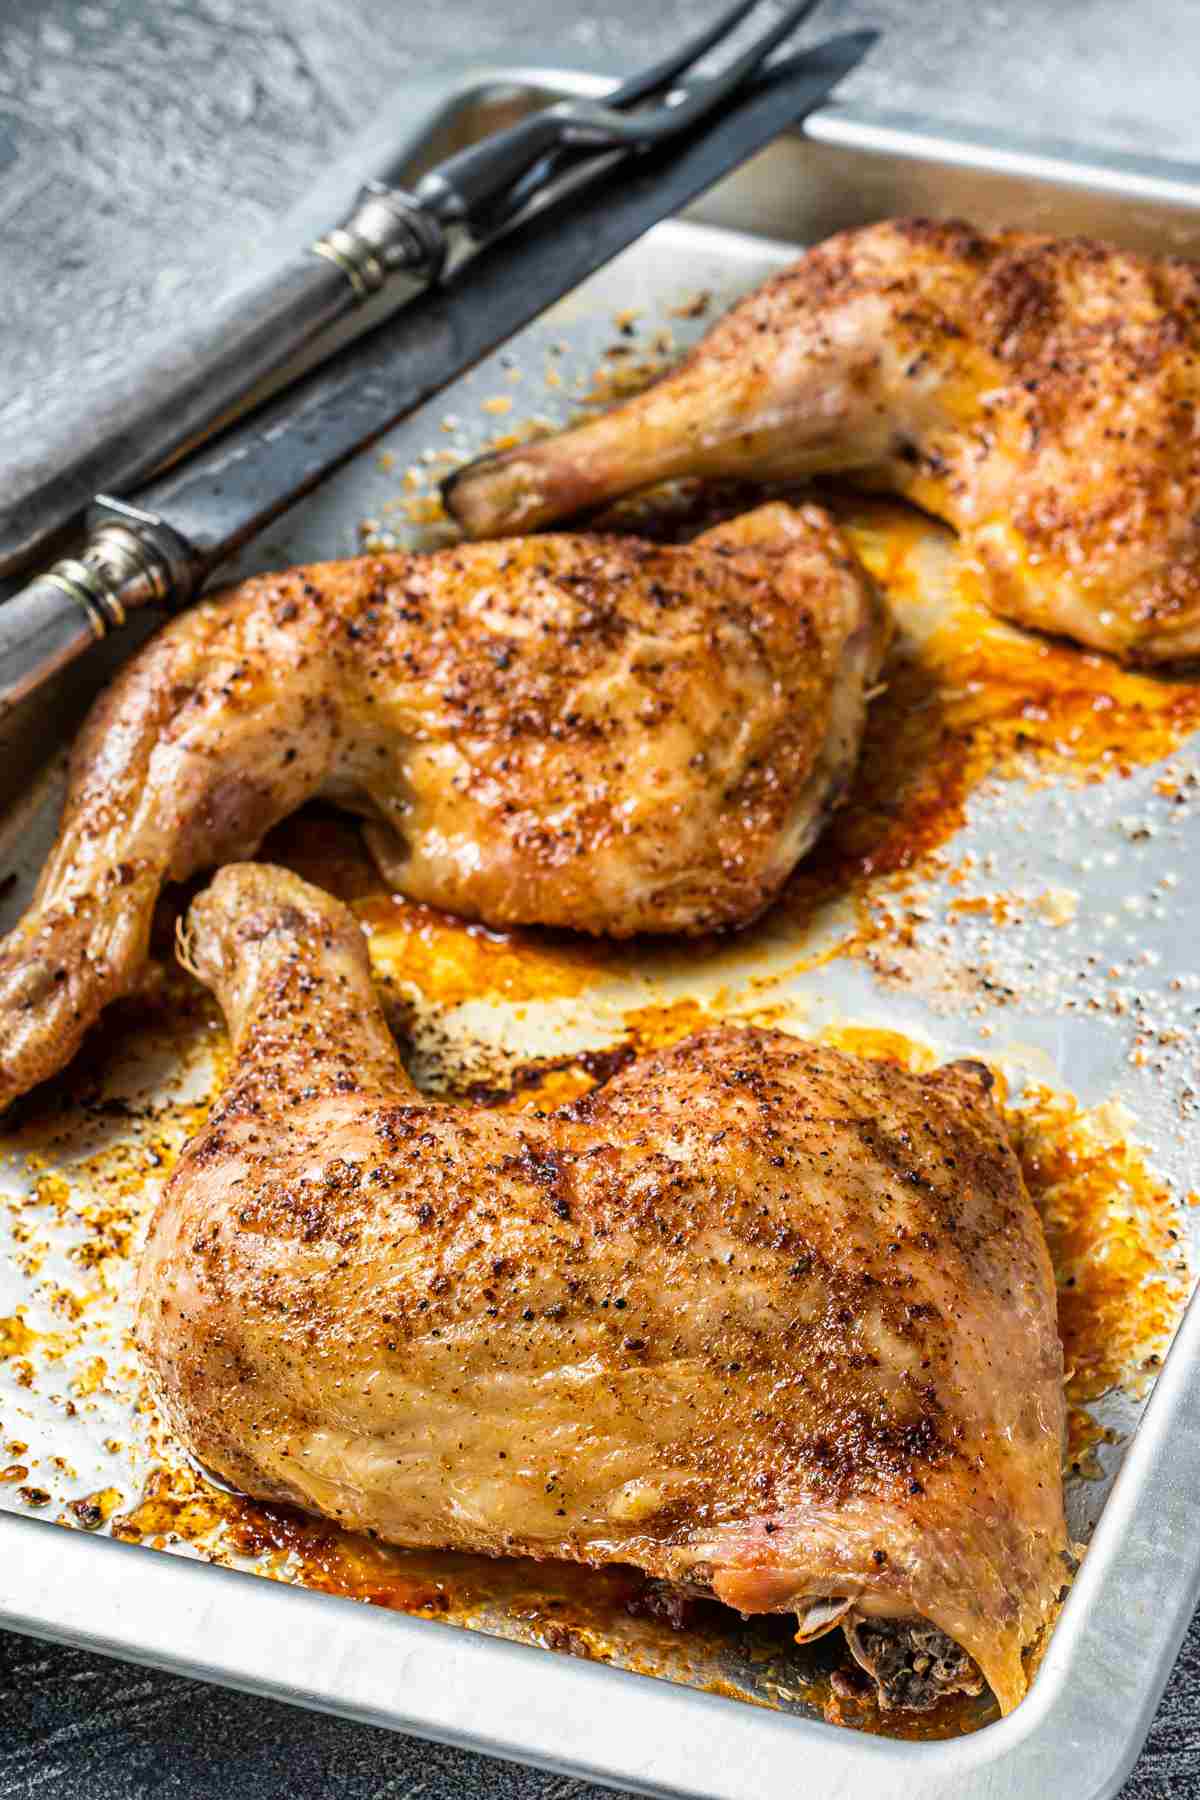 Have you wondered “What Temp to Bake Chicken” to get the perfect tender and juicy meat? Whether you are baking boneless or bone-in chicken breasts, chicken thighs, chicken wings, or roasting the whole chicken, we’ve got you covered with how to bake chicken in the oven with different oven temperatures, as well as some tips to cook them perfectly every time!